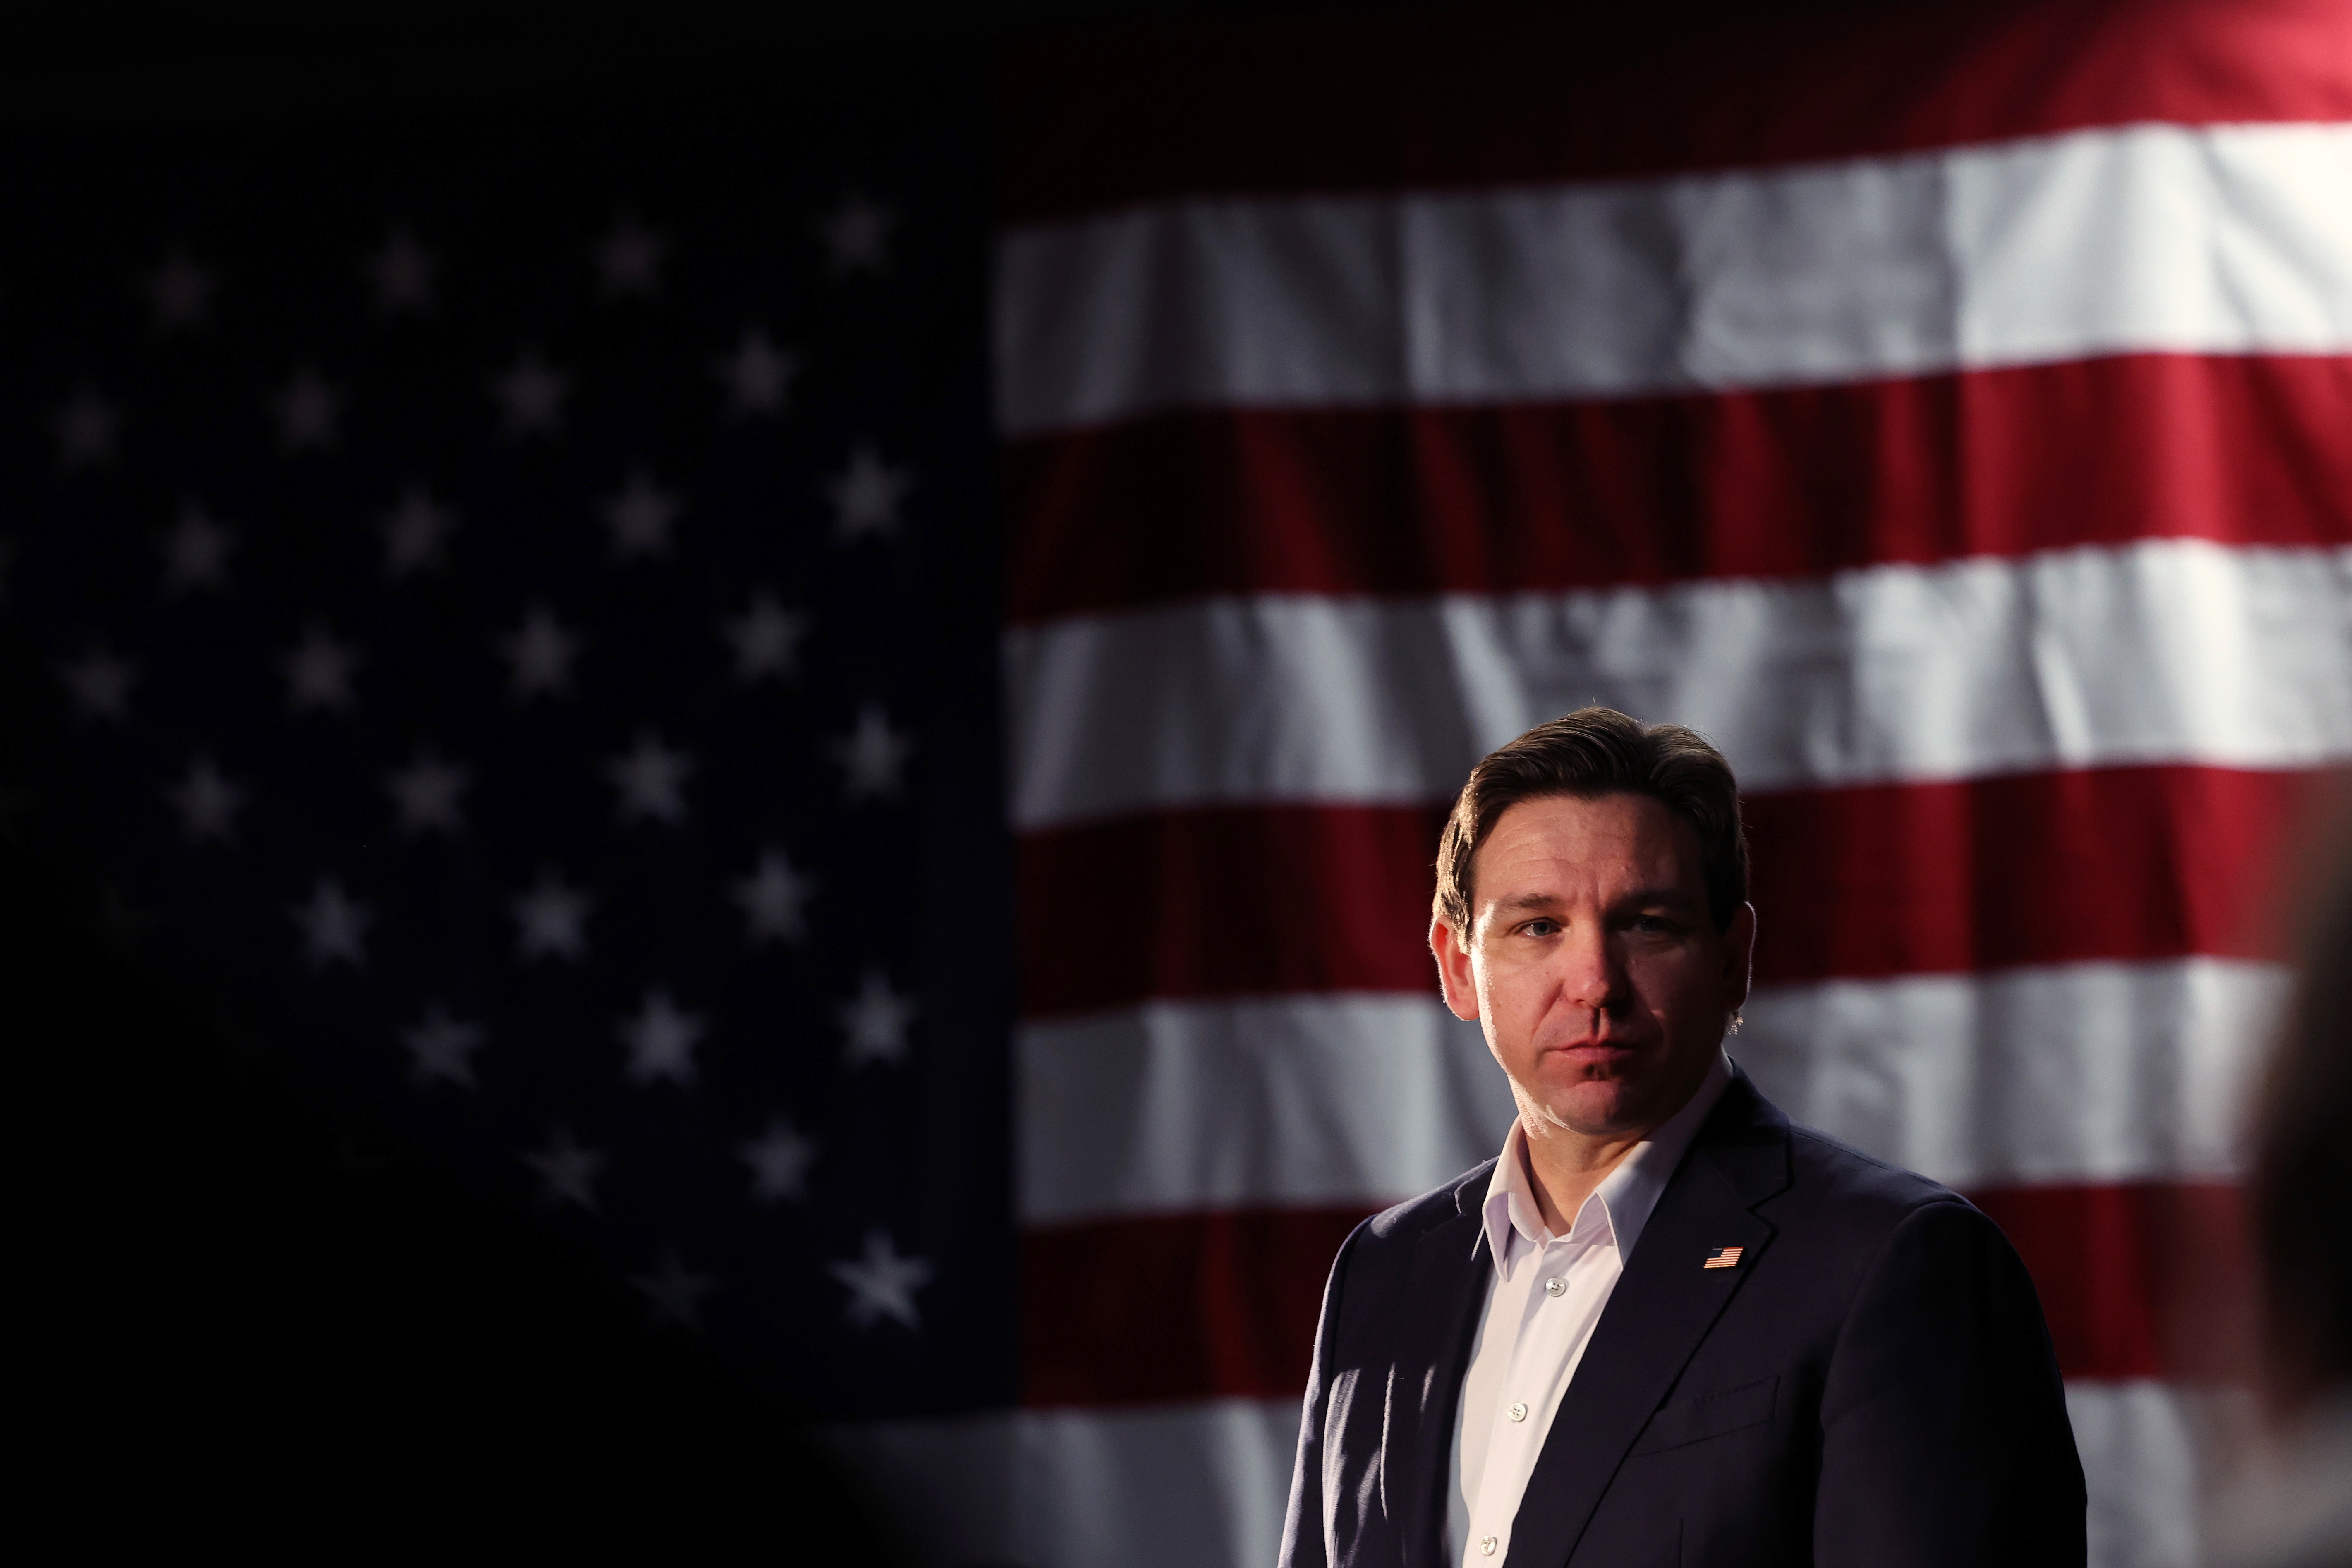 Florida Gov. Ron DeSantis speaks at a campaign event in Council Bluffs, Iowa, on January 13.